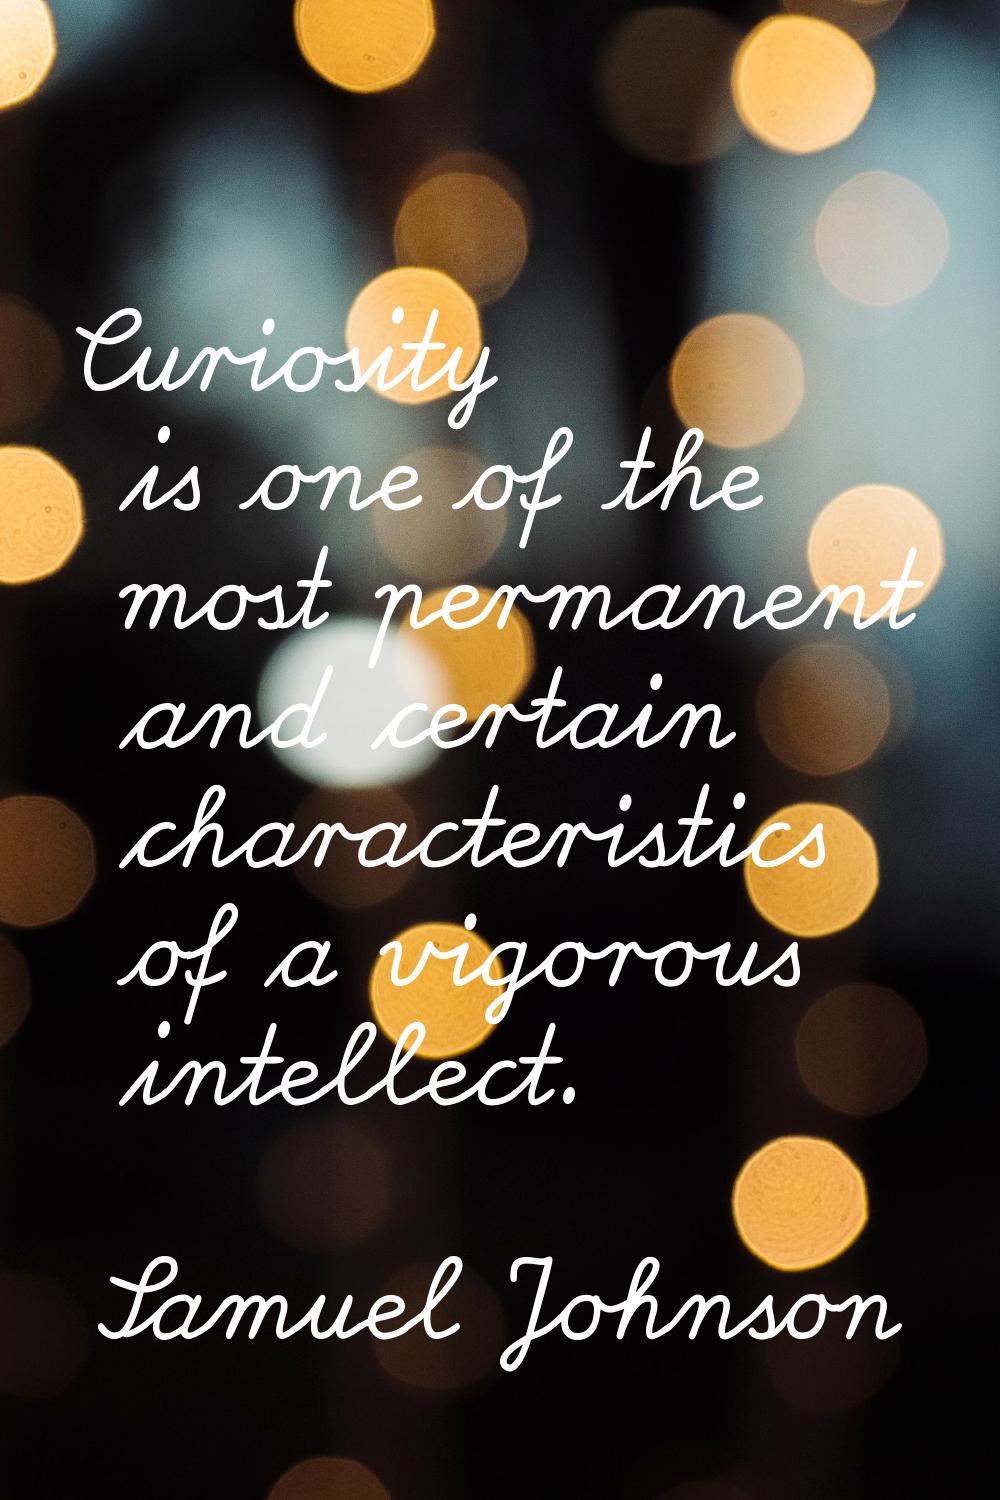 Curiosity is one of the most permanent and certain characteristics of a vigorous intellect.